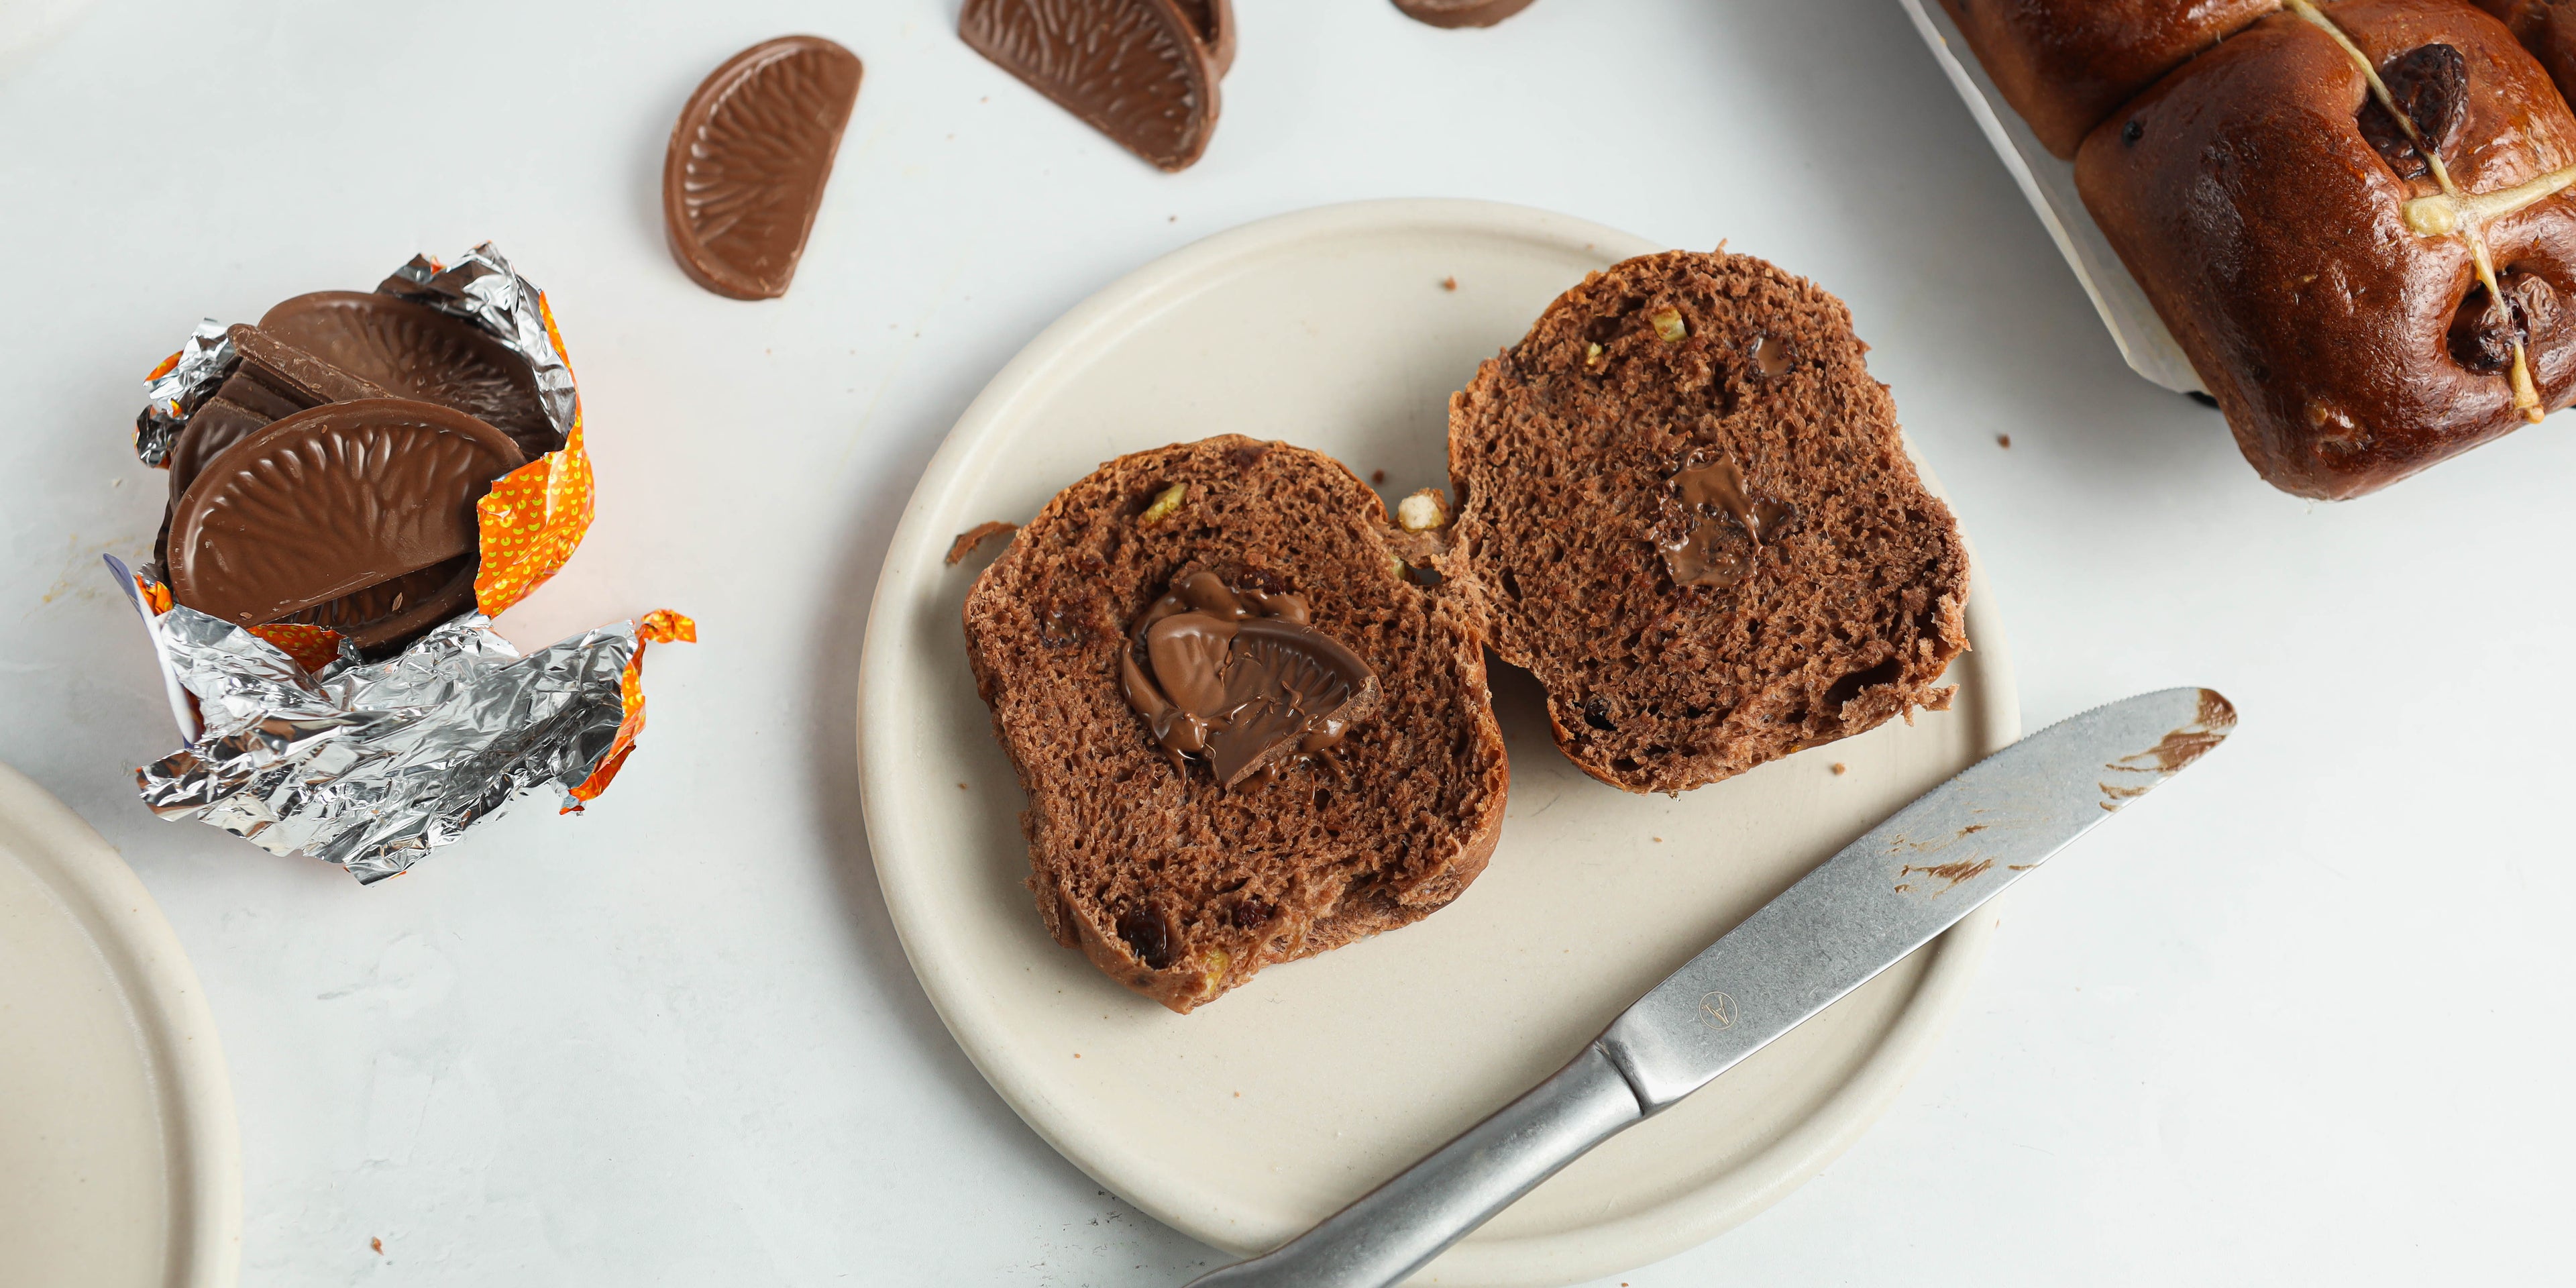 Close up of a chocolate hot cross bun sliced in half next to a Terry's Chocolate Orange